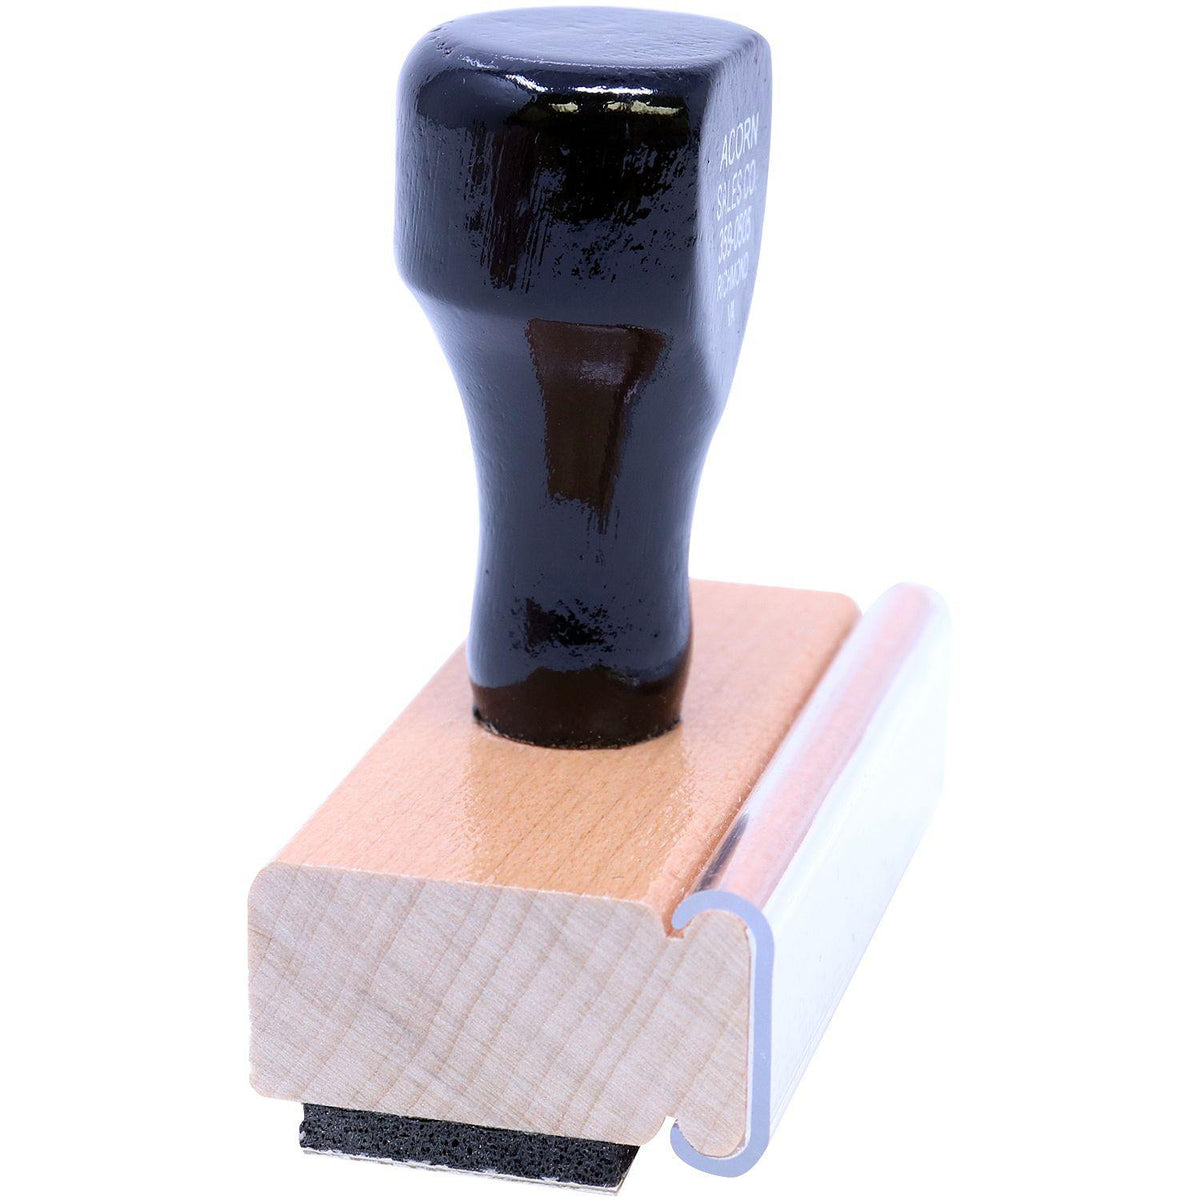 Side View of Large Court Copy Rubber Stamp at an Angle